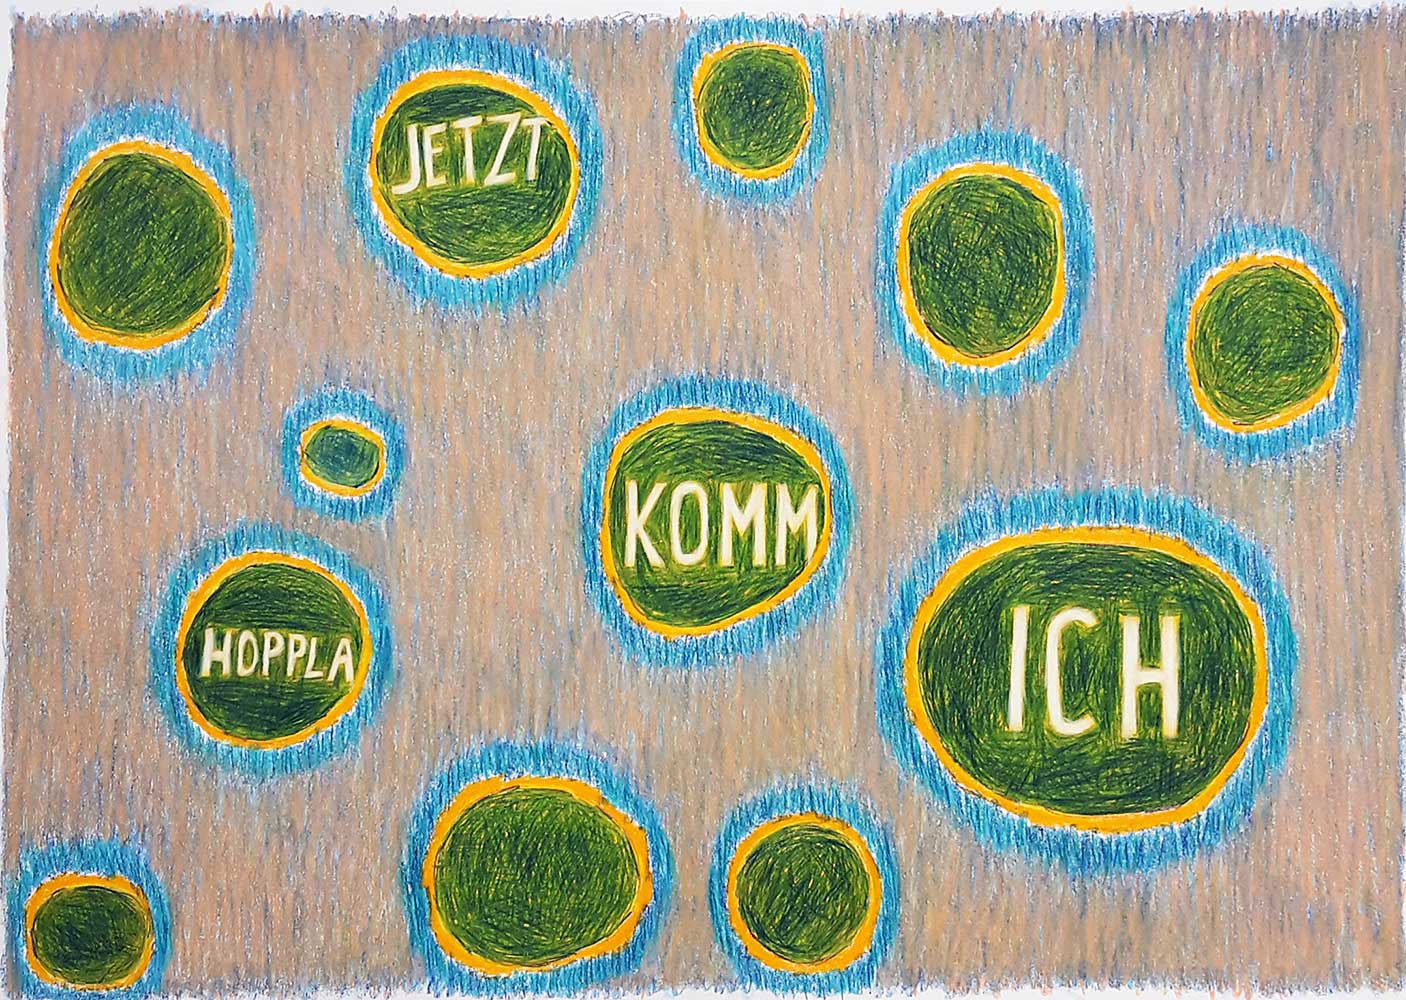 Drawing wax pastel 'Hoppla' Angelika Hasse 2020 text art on paper